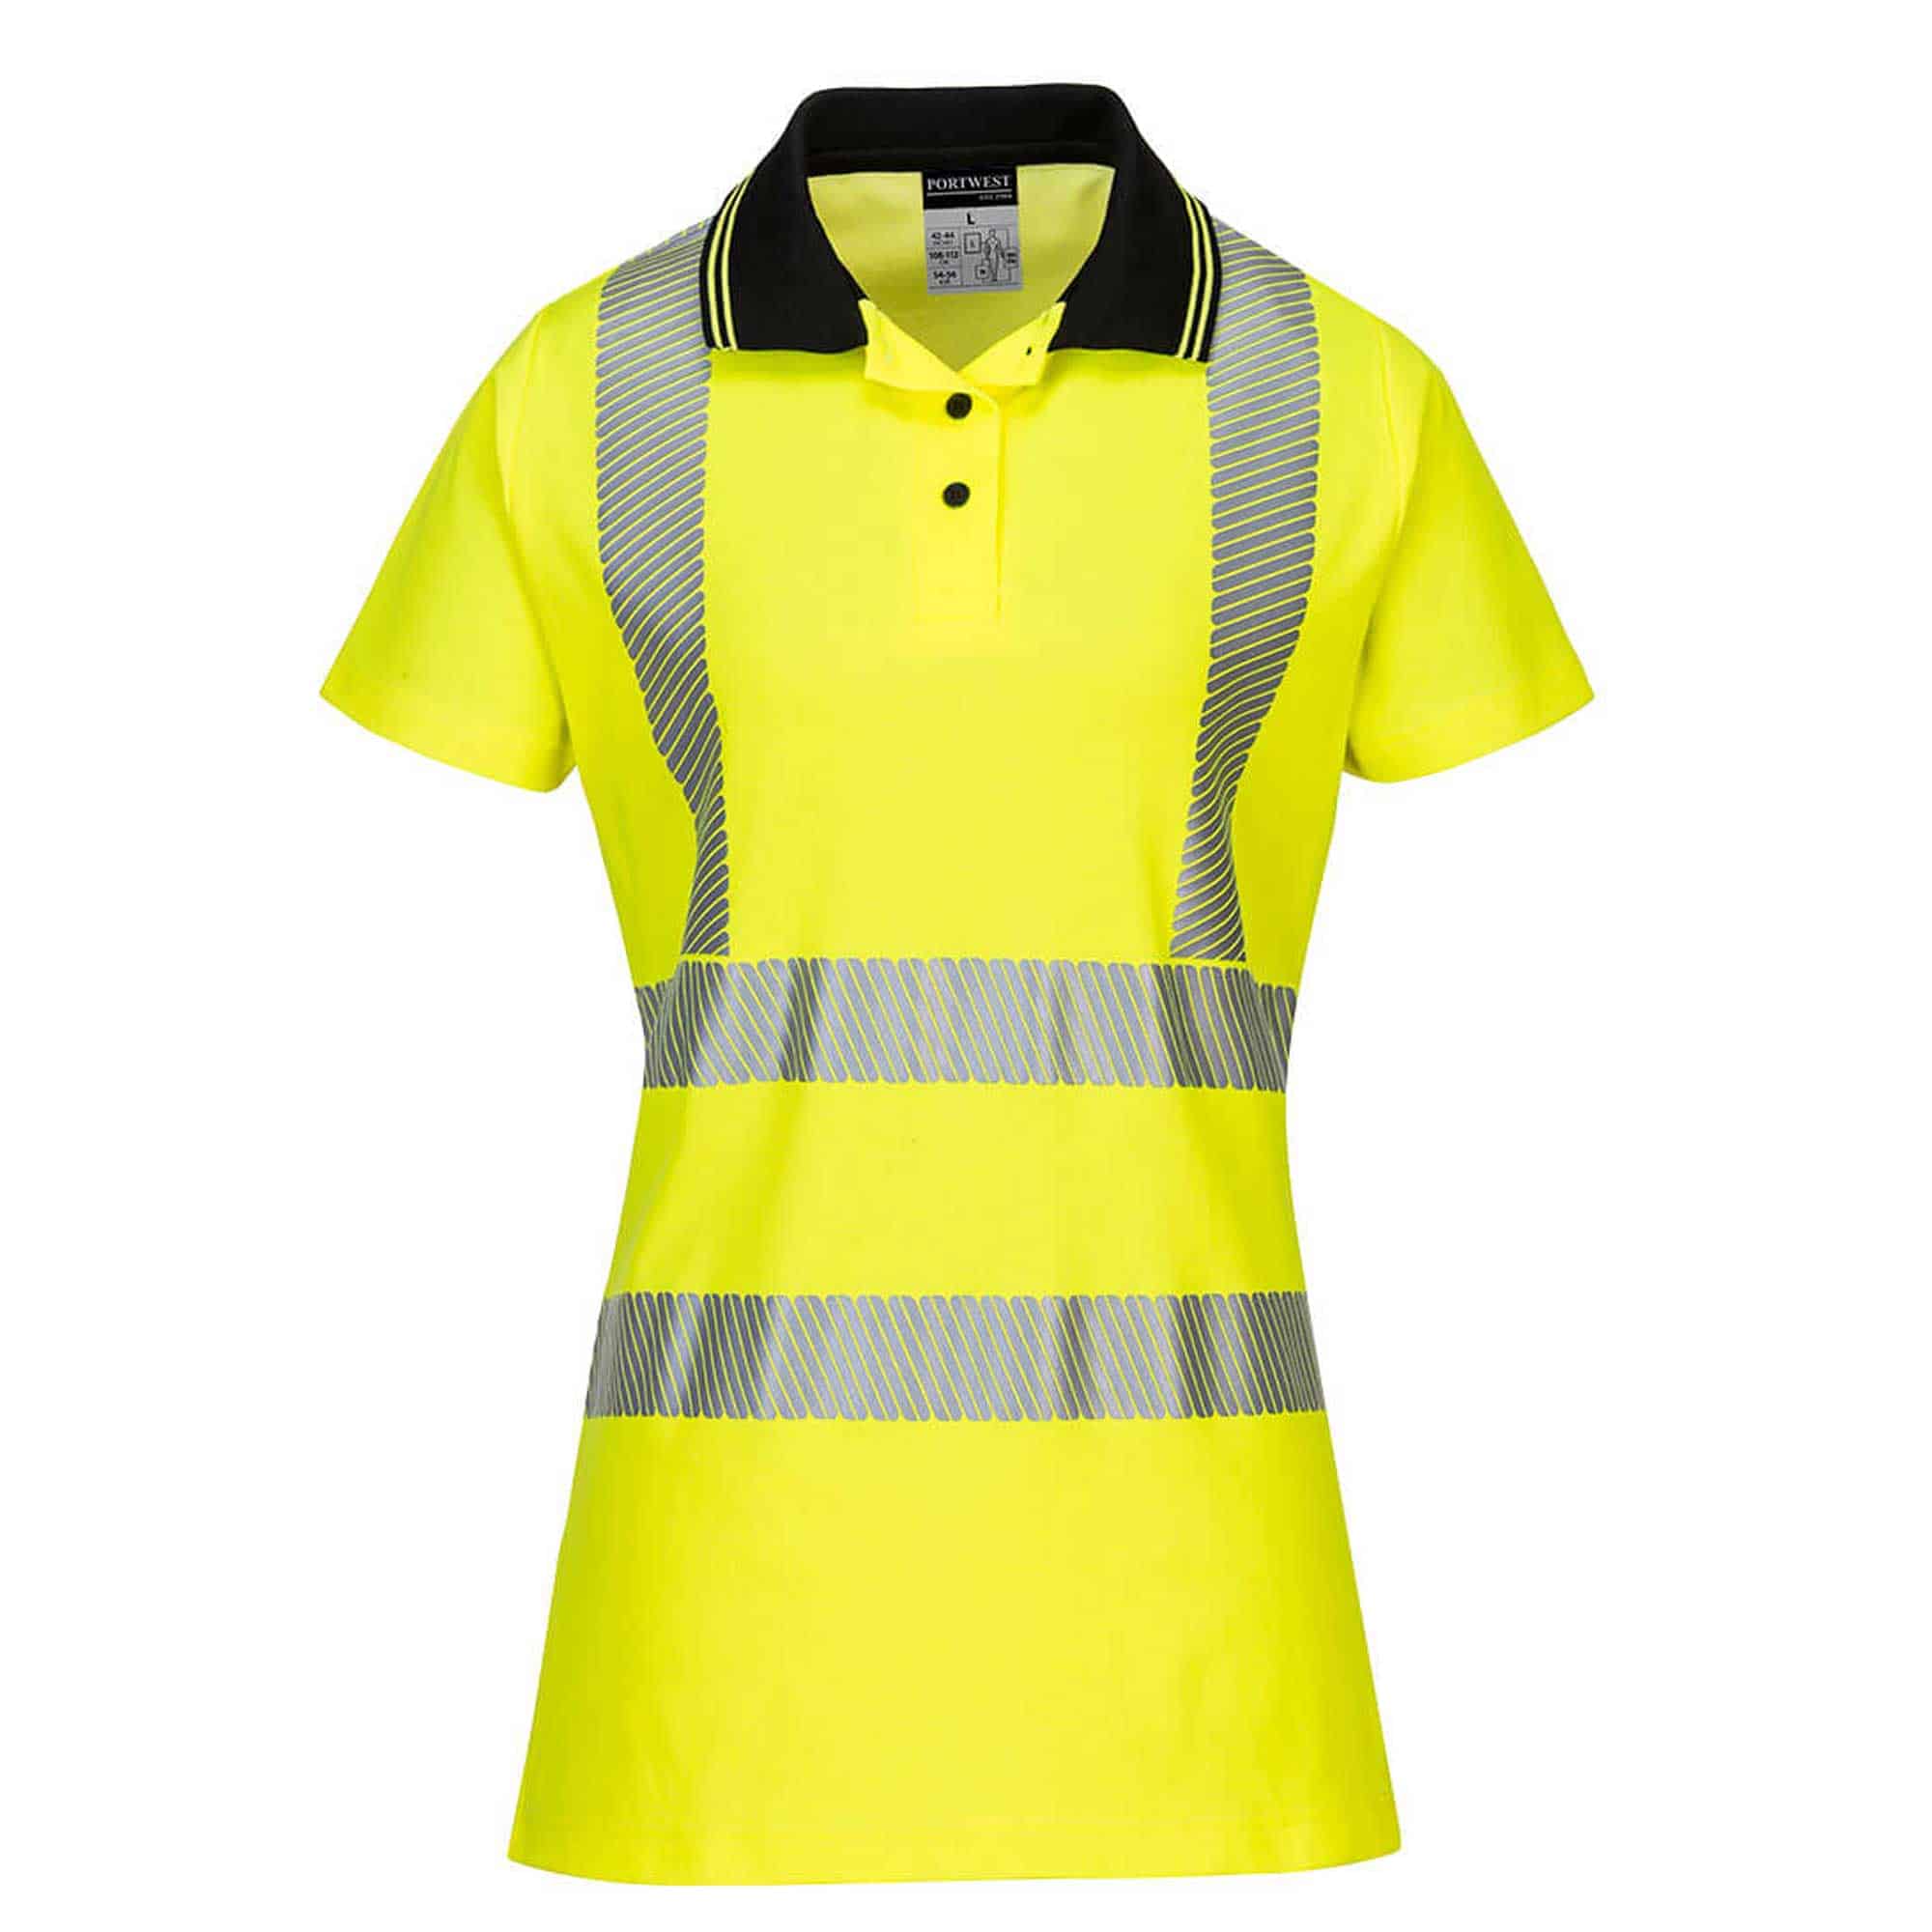 Portwest LW72 Womens Pro Polo Shirt - National Safety Gear